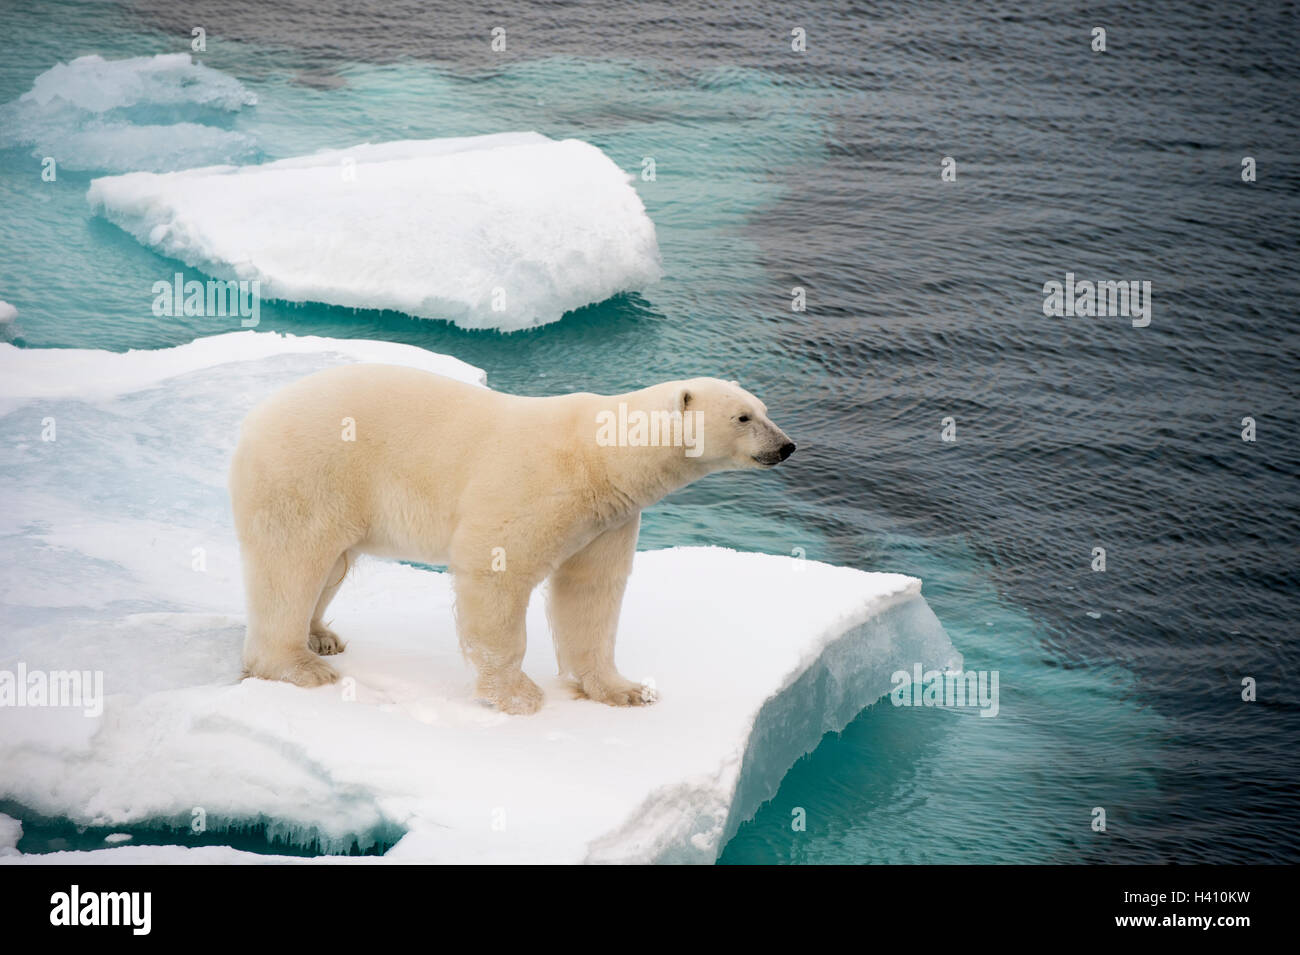 Polar bear (Ursus maritimus) on sea ice in Russian Arctic, photographed during trip to North Pole on board Russian nuclear icebreaker Stock Photo